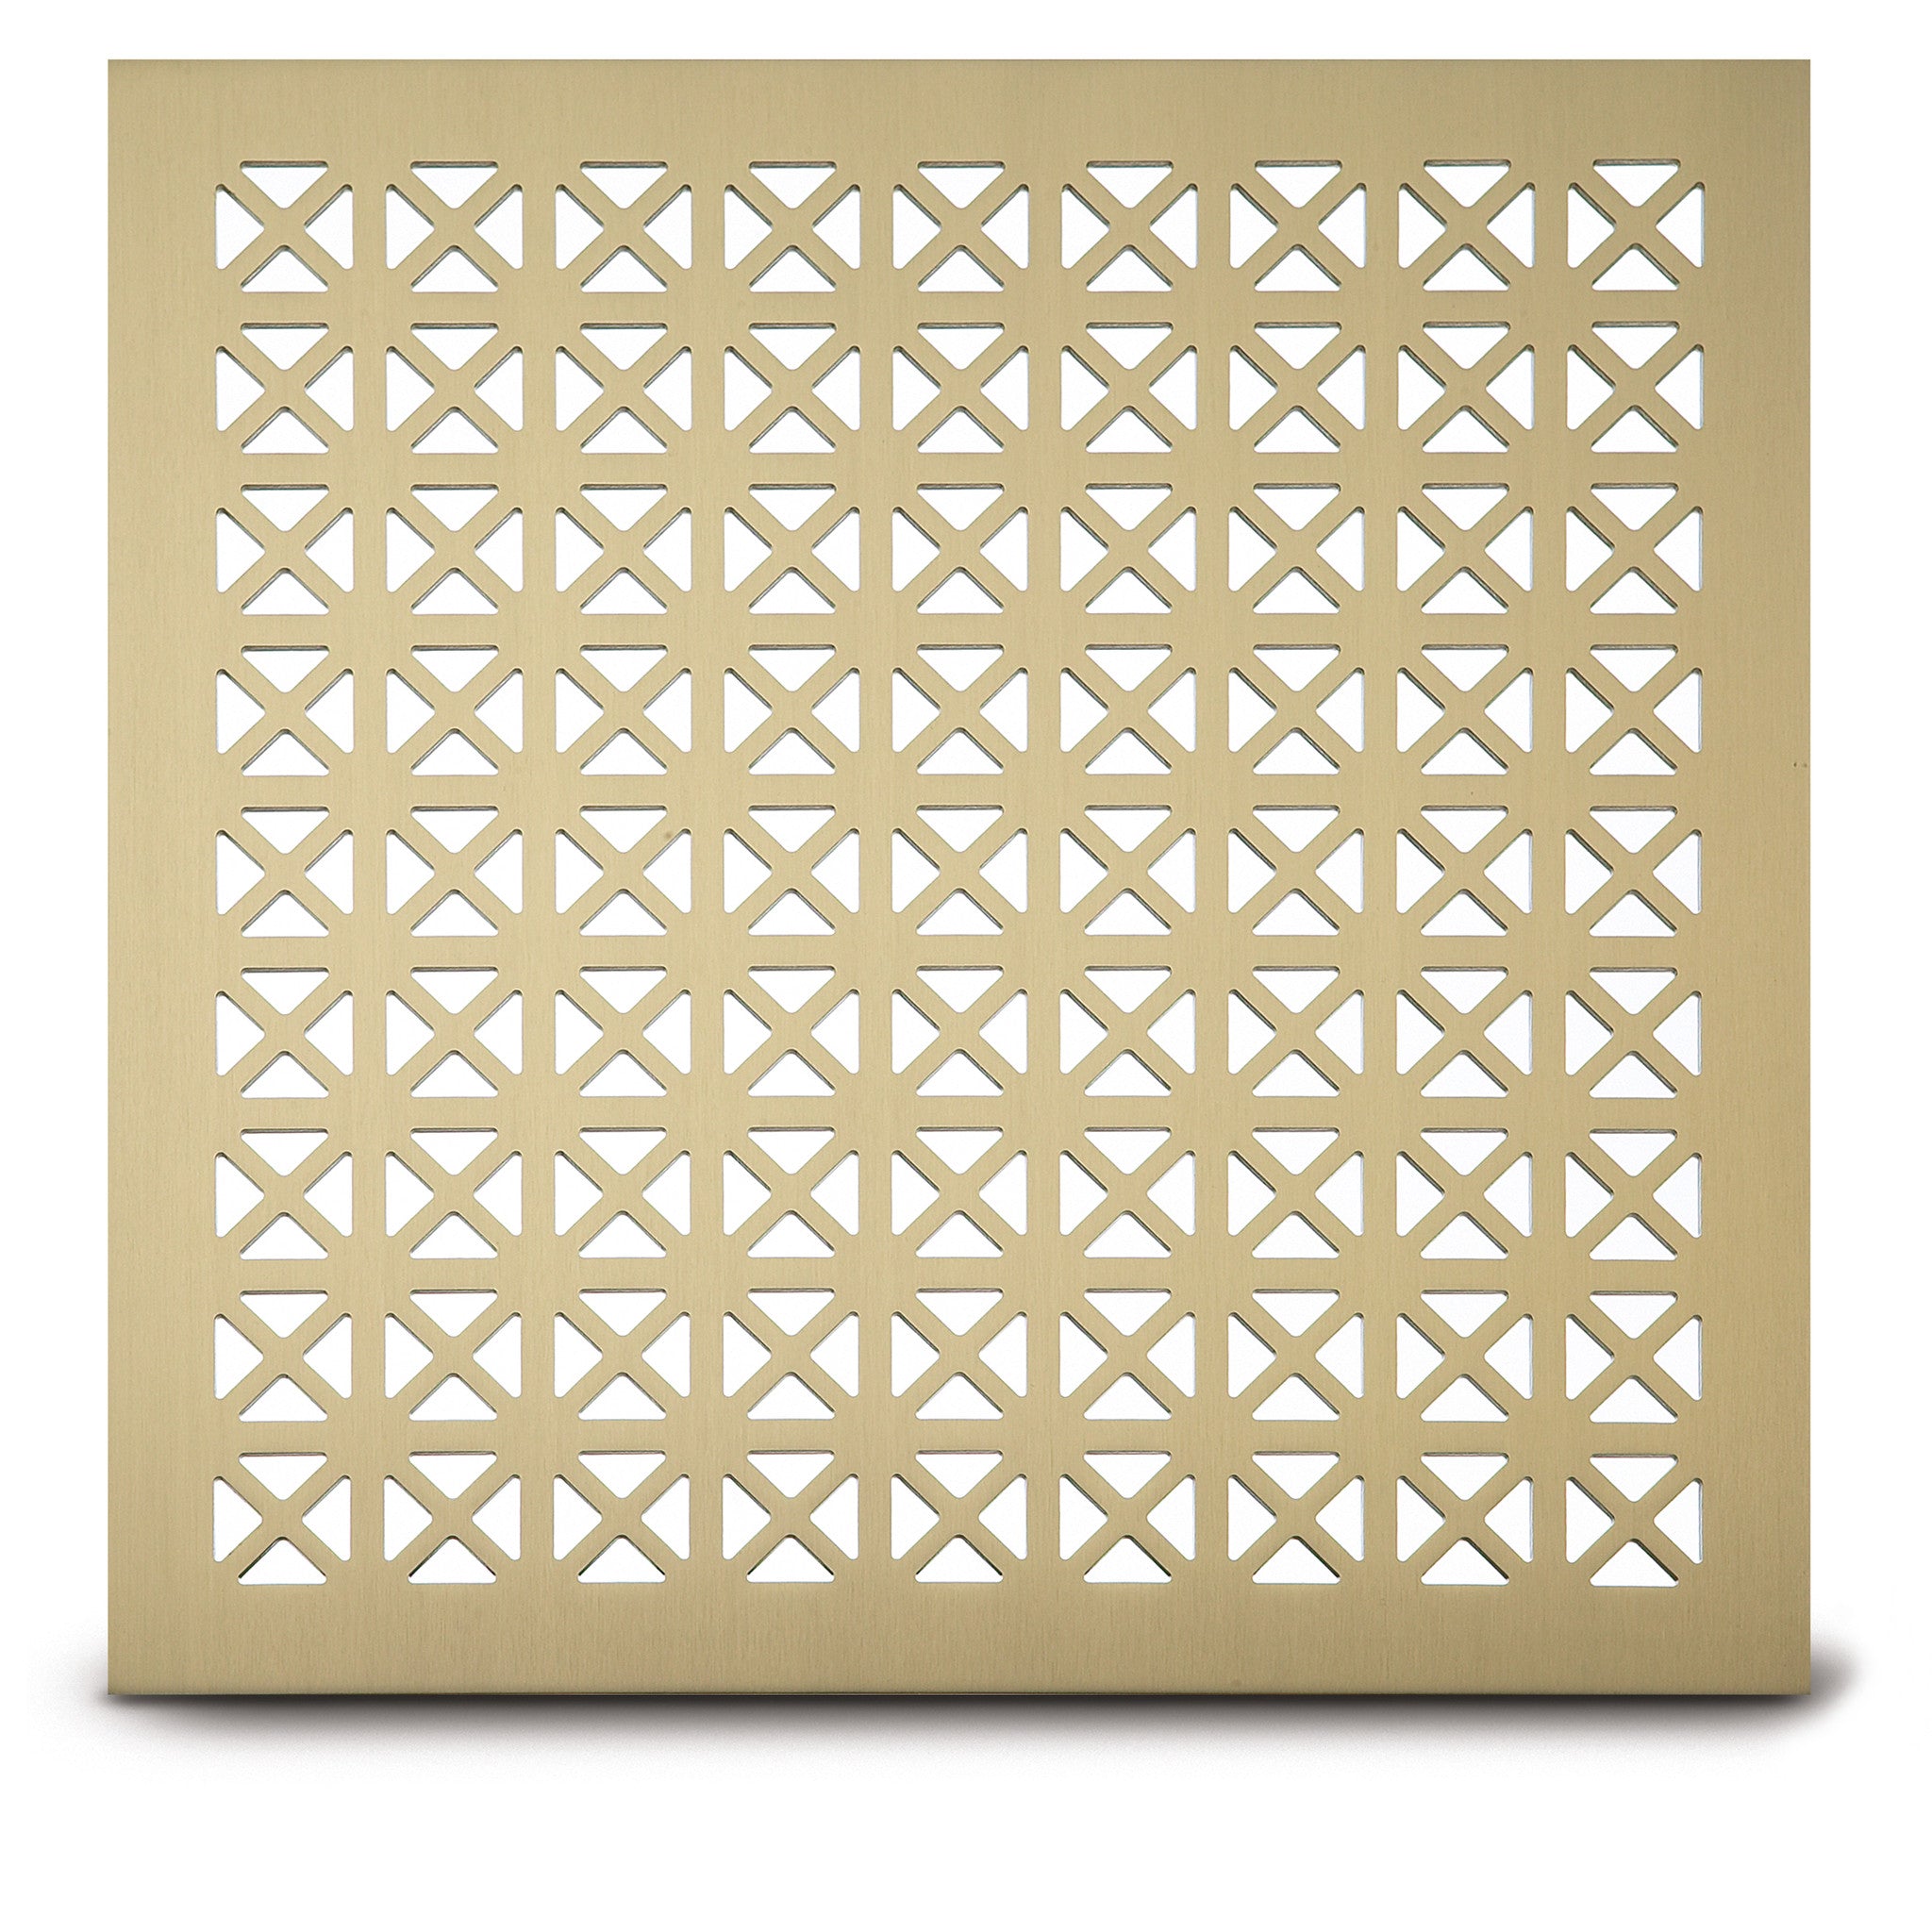 206 Maltese Perforated Grille: 15/16” pattern - 38% open area